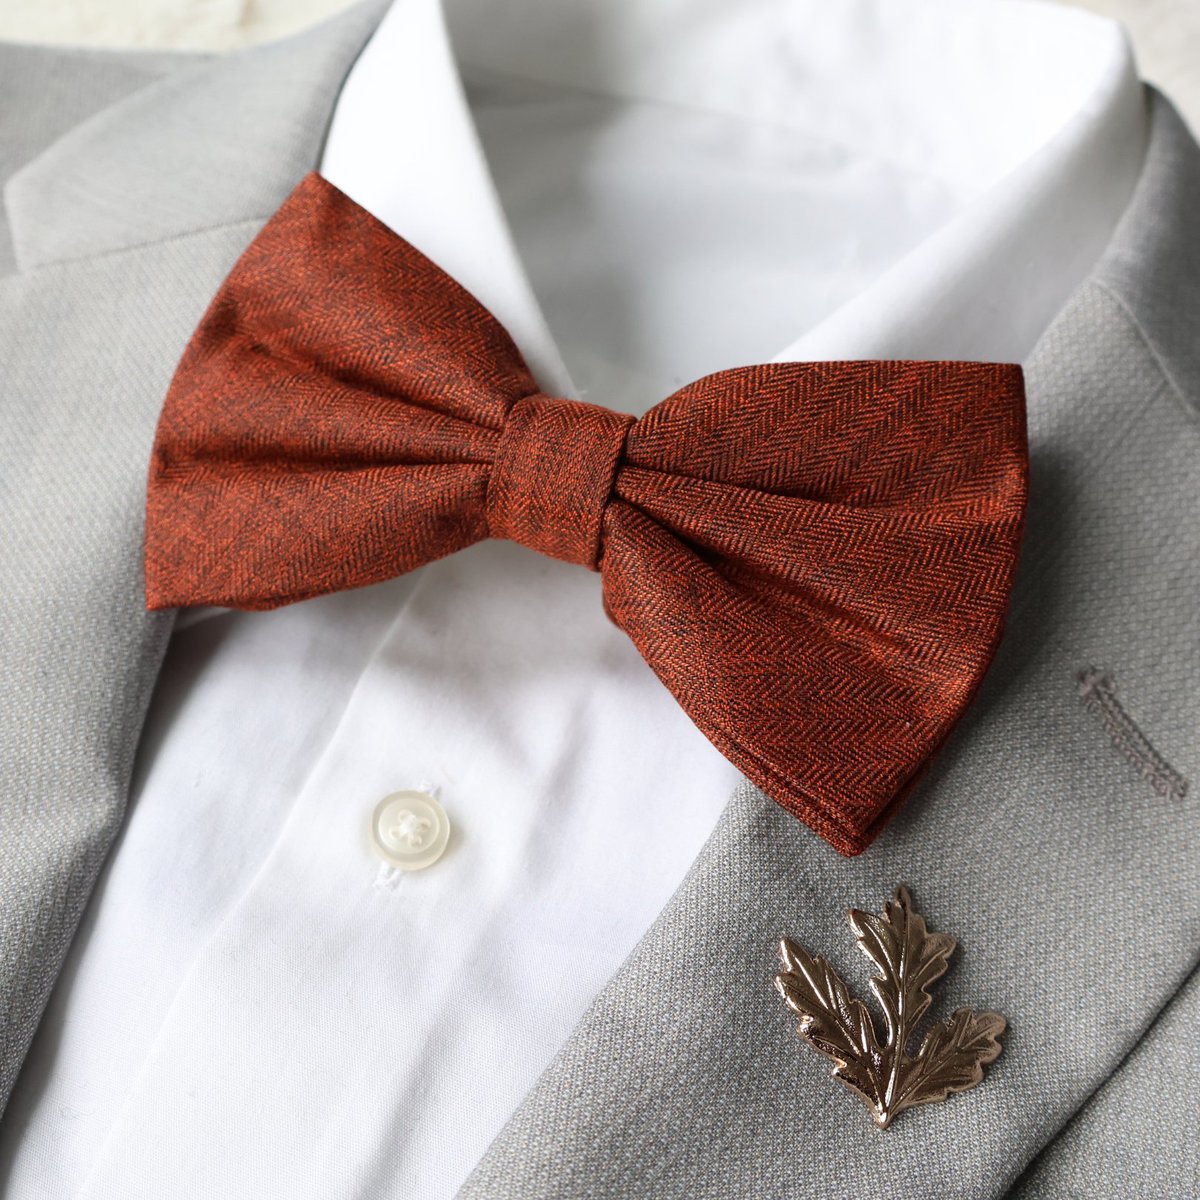 Tied up in style for fall 🍁 #bowties #bowtie #bowtiesarecool #bowtienation #bowtiestyle #bowtielife #bowtieready #mensstyle #menswear #mensfashion #groomsmen #groomswear #weddingwear #weddingfashion #groomsmenstyle #groomstyle #groomfashion #groomandgroom #groomsinpiration #wedd